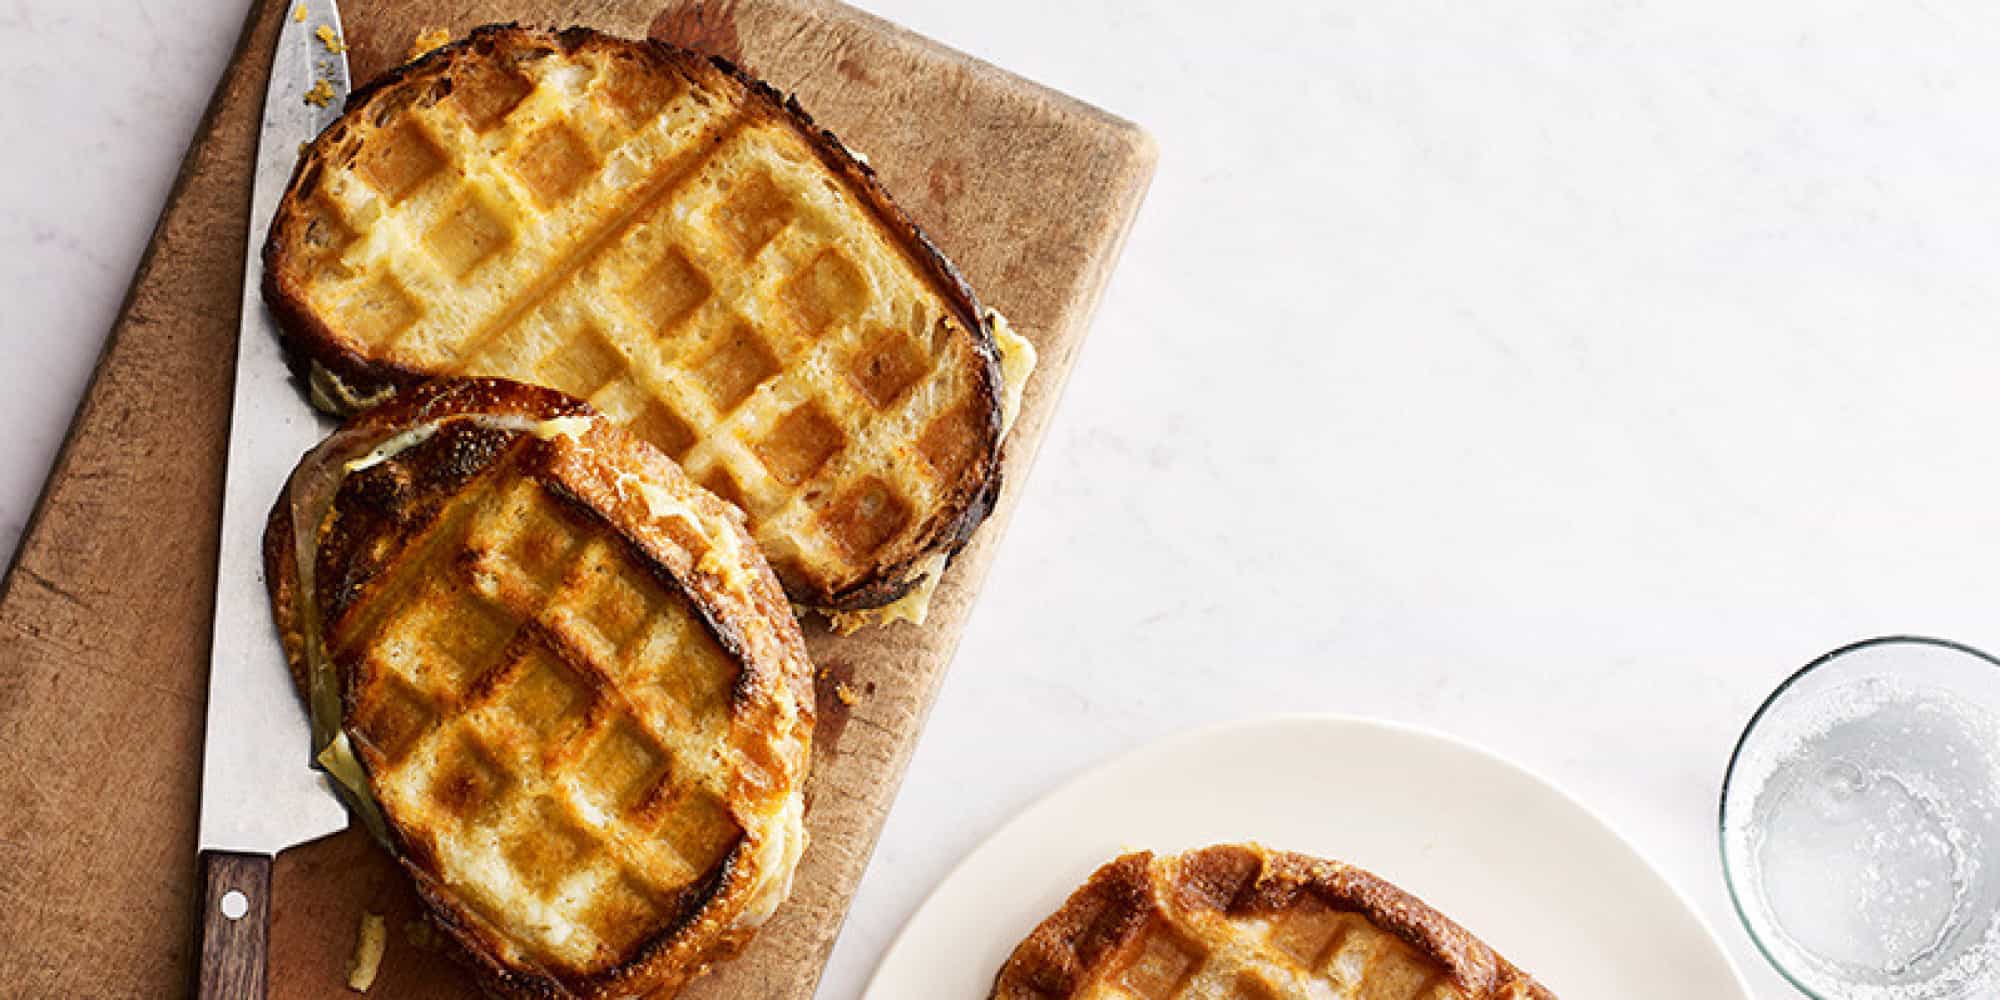 Waffle iron grilled cheese sandwiches